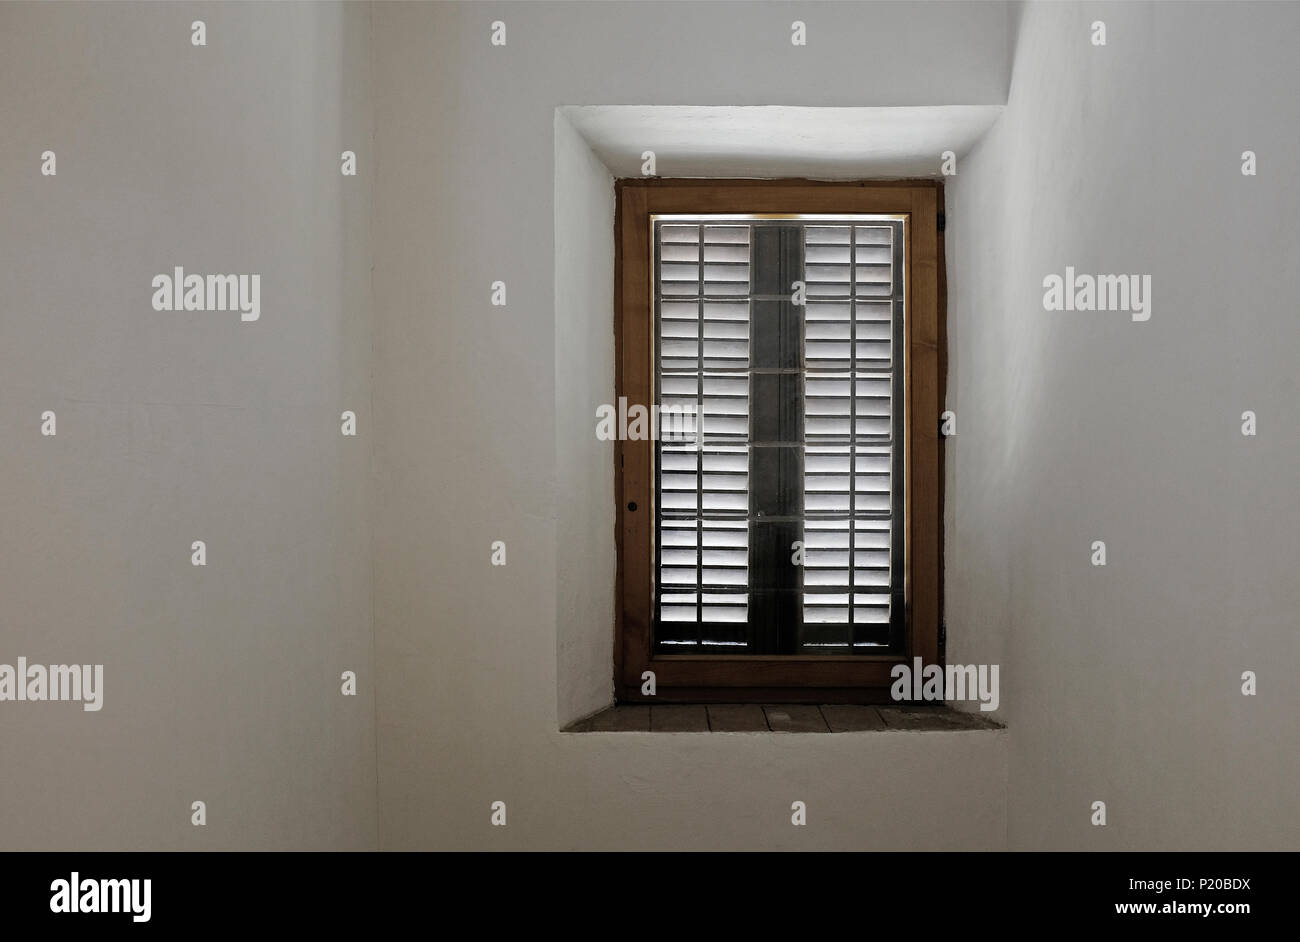 wooden window in white painted room, tuscany, italy Stock Photo